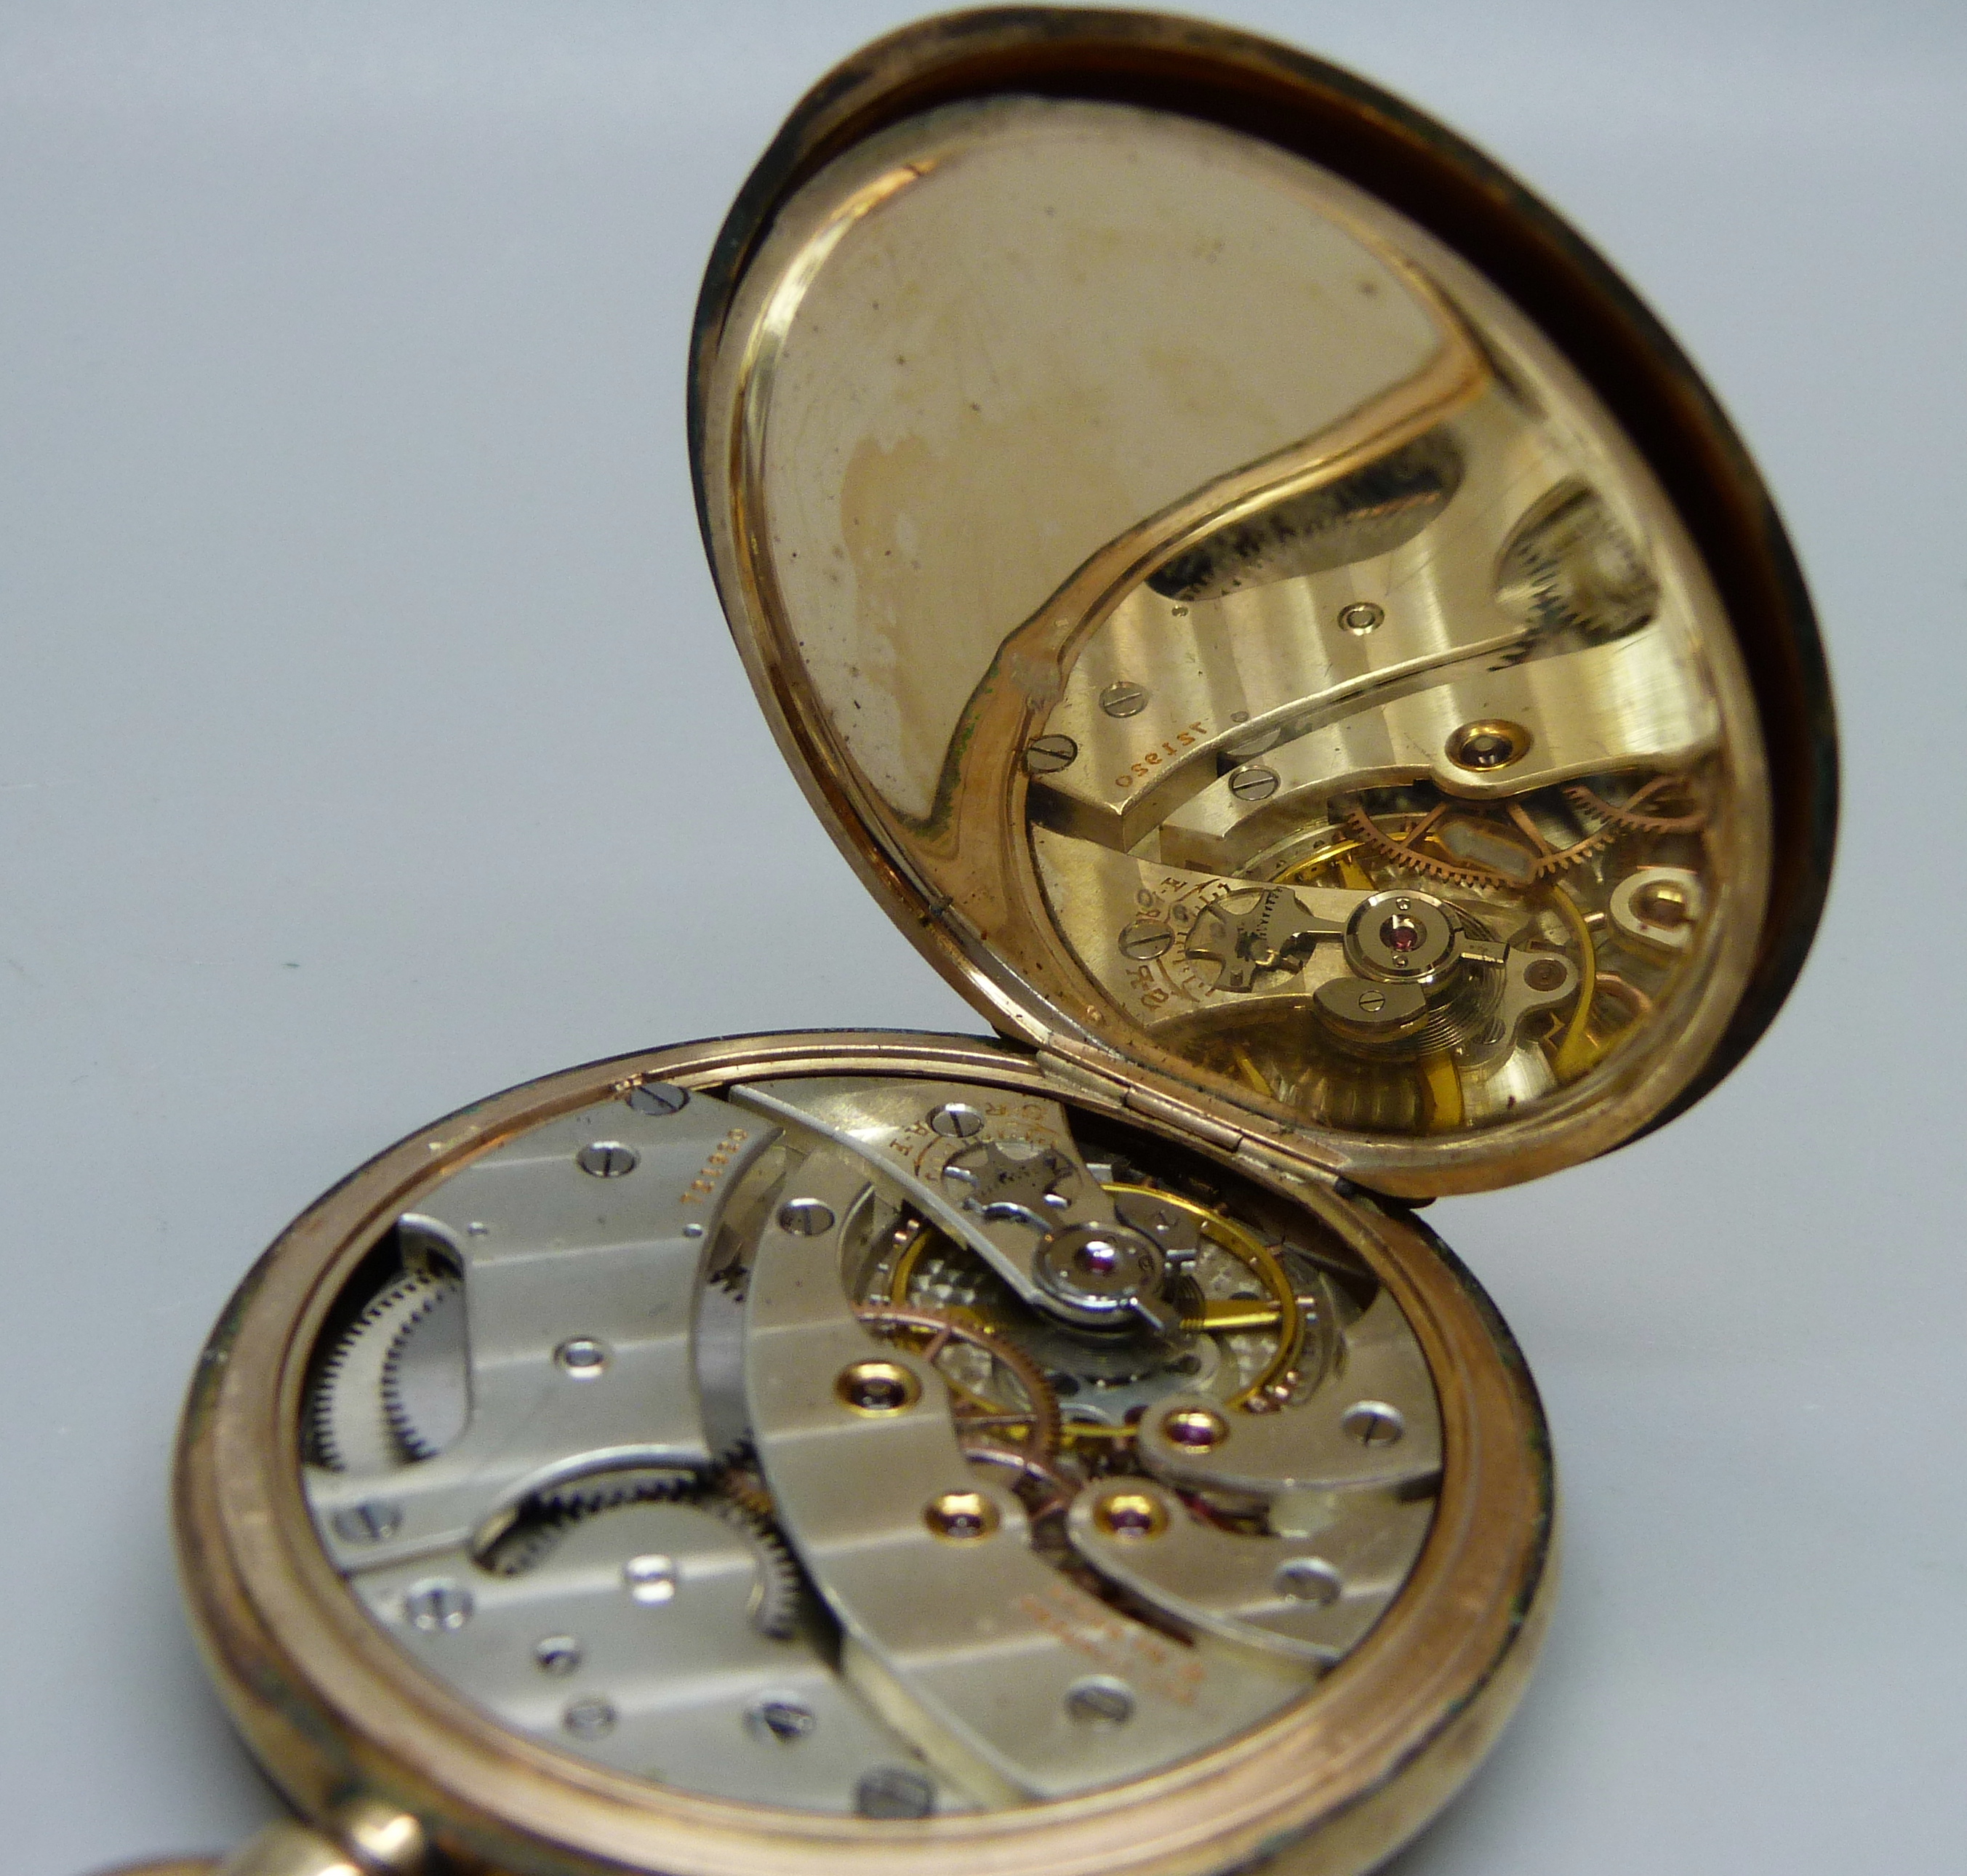 A 9ct gold full-hunter pocket watch, inner case 9ct gold, bears inscription dated 1928 and monogram, - Image 8 of 8